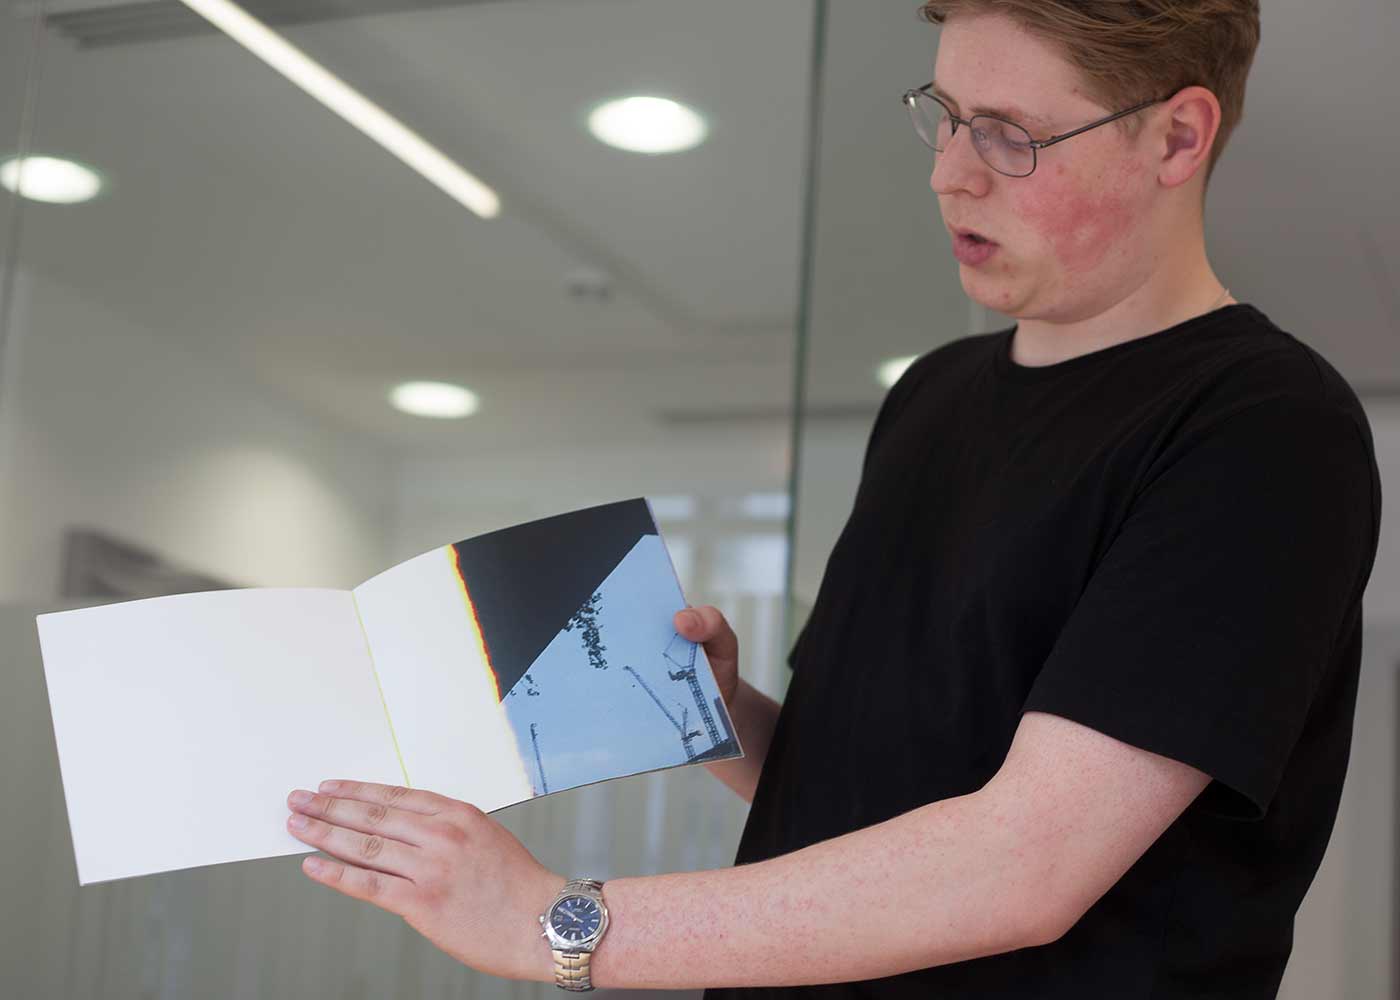 Alex Smith studies photography in the BA Photography (2nd year) at the School of Arts and Creative Industries, LSBU, and presented his new photobook OVERGROWN